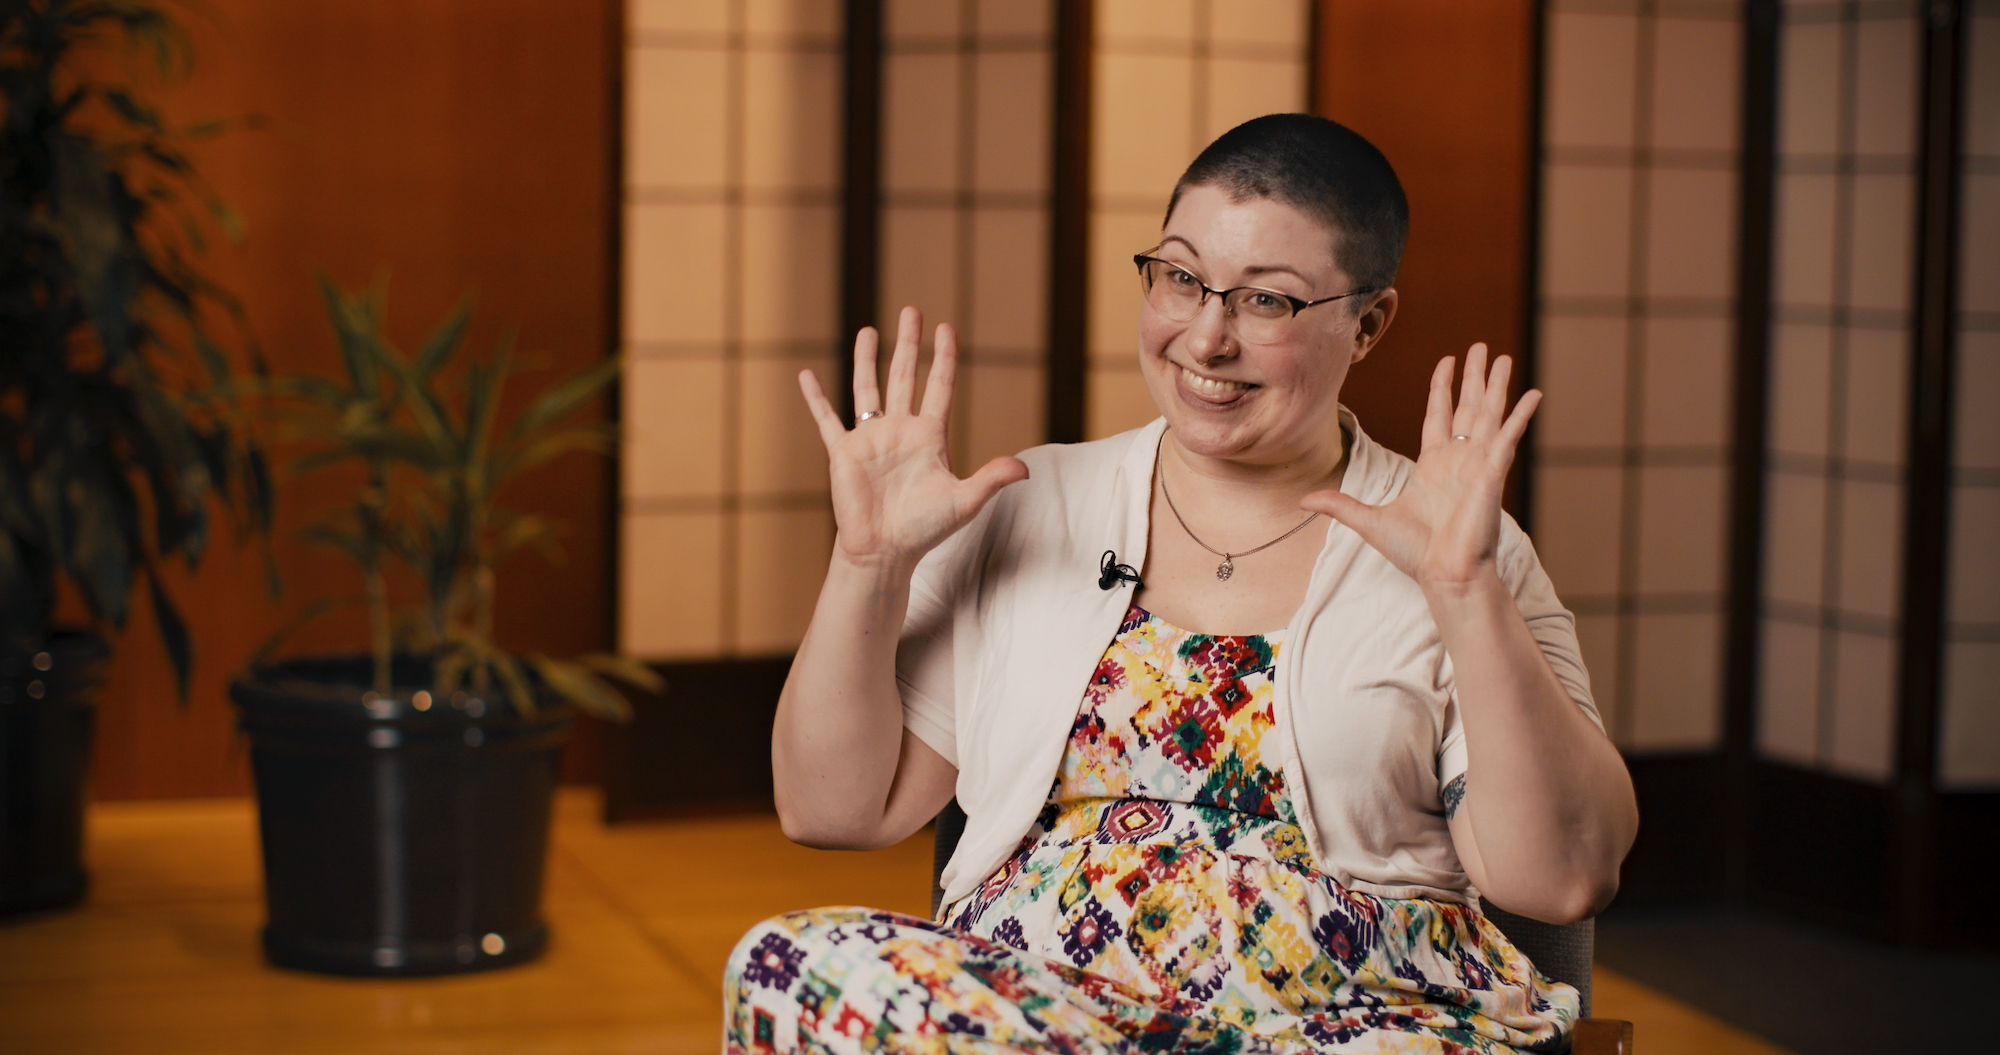 Woman with funny expression being interviewed in a warm colored room with wall blinds.